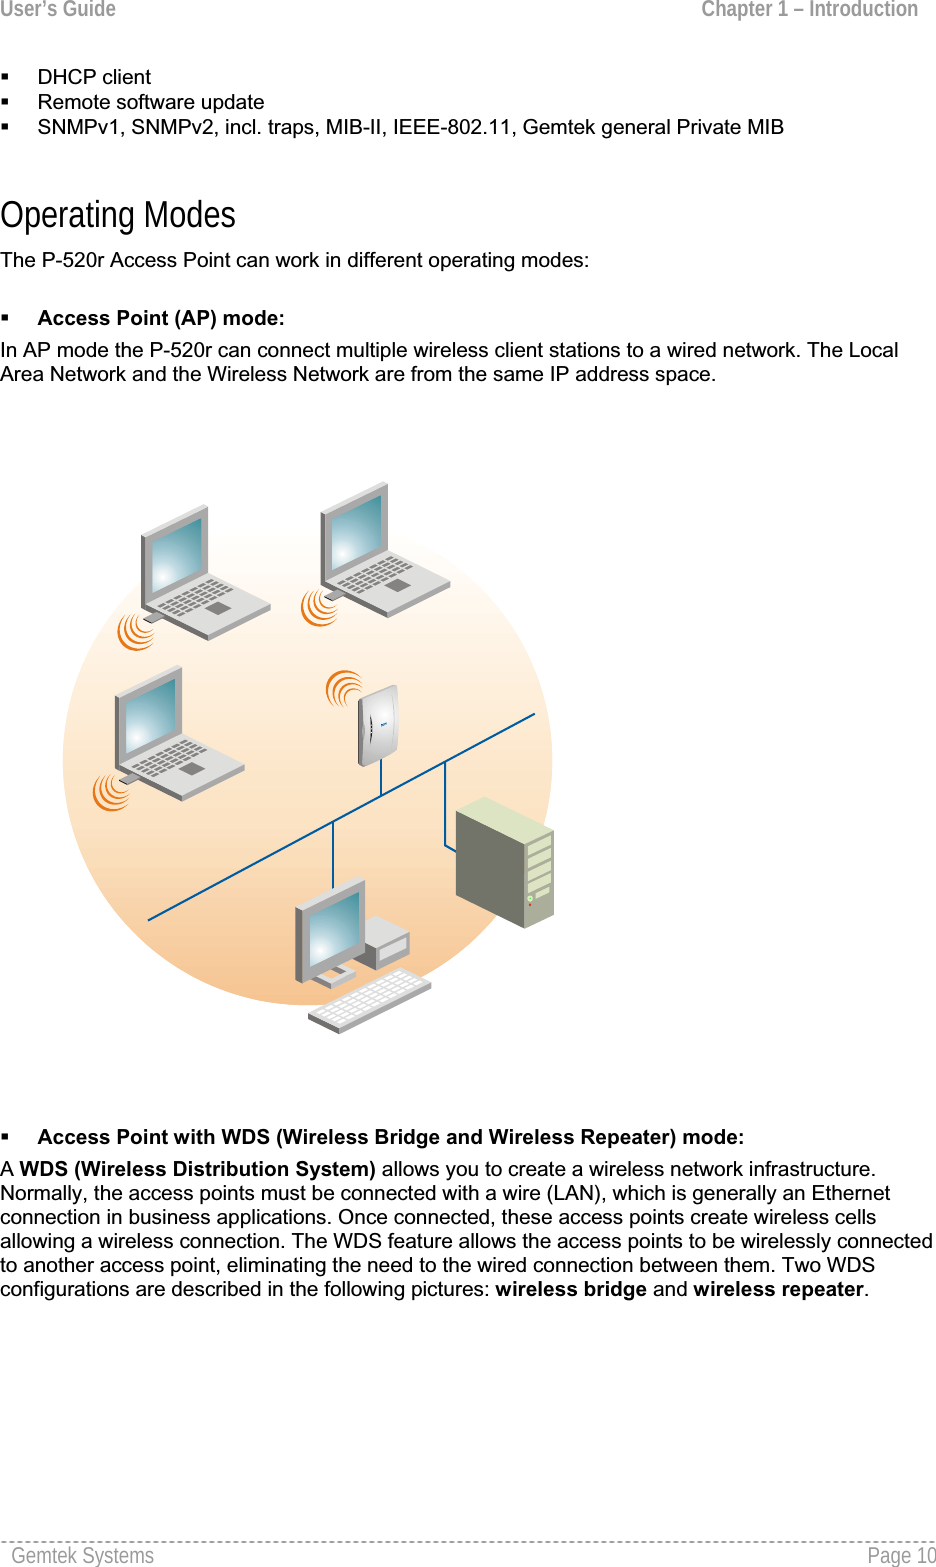 User’s Guide  Chapter 1 – Introduction  DHCP client Remote software updateSNMPv1, SNMPv2, incl. traps, MIB-II, IEEE-802.11, Gemtek general Private MIB Operating Modes The P-520r Access Point can work in different operating modes: Access Point (AP) mode:In AP mode the P-520r can connect multiple wireless client stations to a wired network. The Local Area Network and the Wireless Network are from the same IP address space.Access Point with WDS (Wireless Bridge and Wireless Repeater) mode:AWDS (Wireless Distribution System) allows you to create a wireless network infrastructure.Normally, the access points must be connected with a wire (LAN), which is generally an Ethernet connection in business applications. Once connected, these access points create wireless cellsallowing a wireless connection. The WDS feature allows the access points to be wirelessly connectedto another access point, eliminating the need to the wired connection between them. Two WDSconfigurations are described in the following pictures: wireless bridge and wireless repeater.Gemtek Systems  Page 10